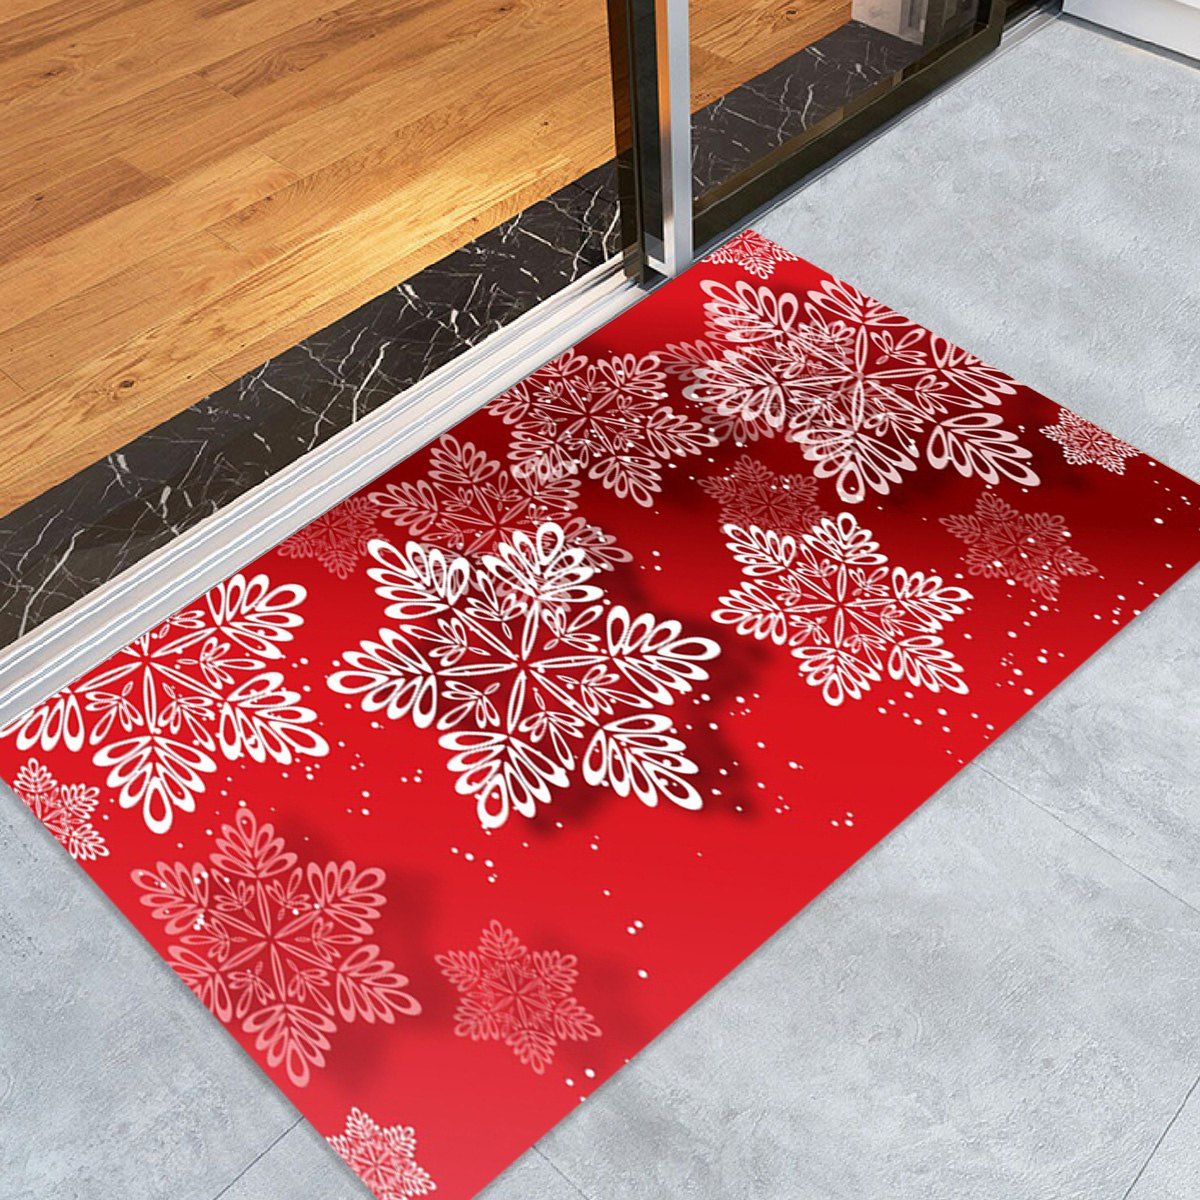 

Christmas Snowflakes Pattern Anti-skid Water Absorption Area Rug, Red